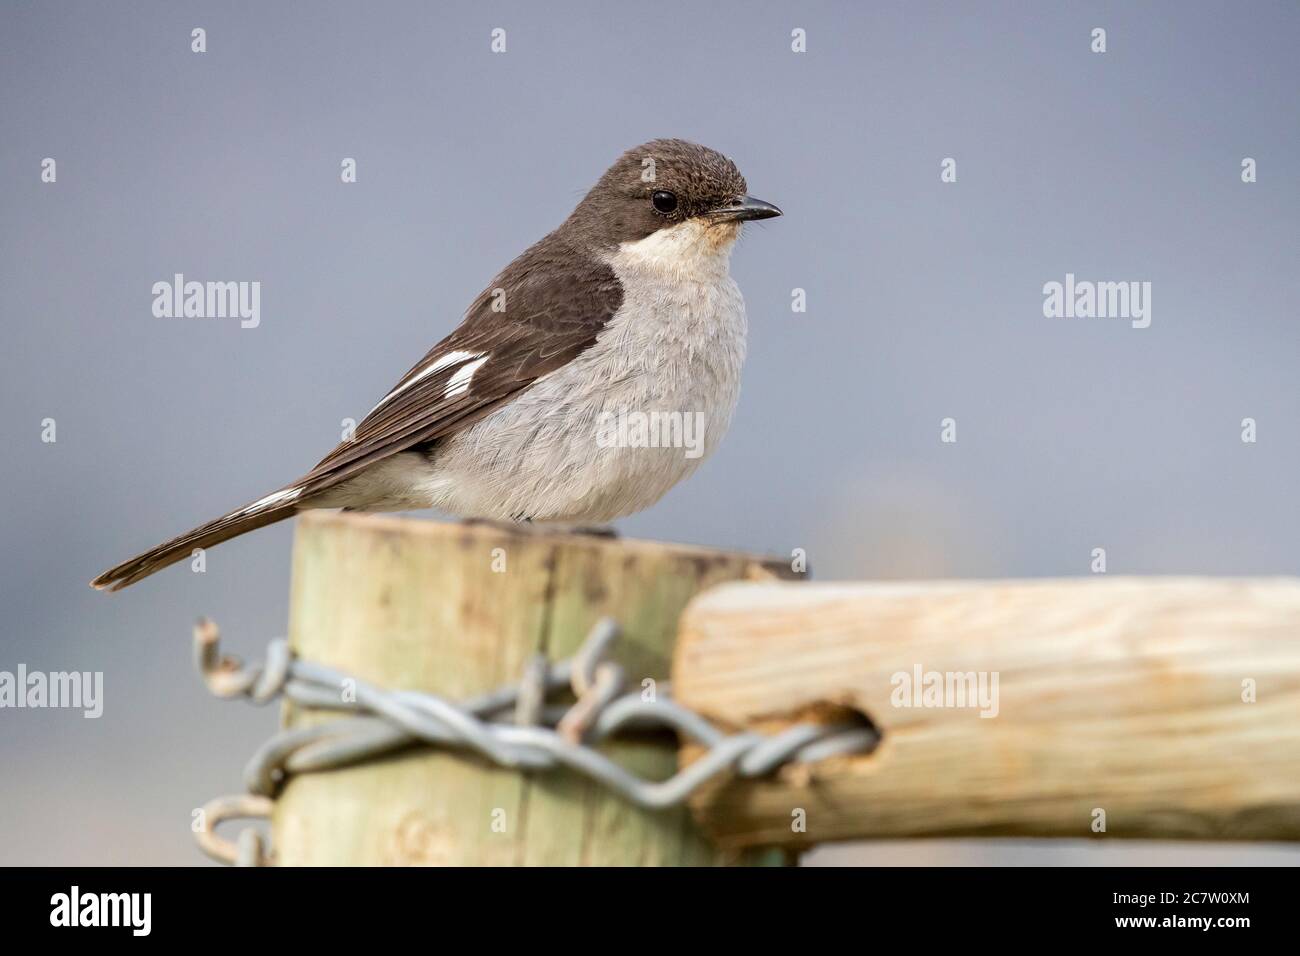 Fiscal Flycatcher (Melaenornis silens), adult female standing on a post, Western Cape, South Africa Stock Photo